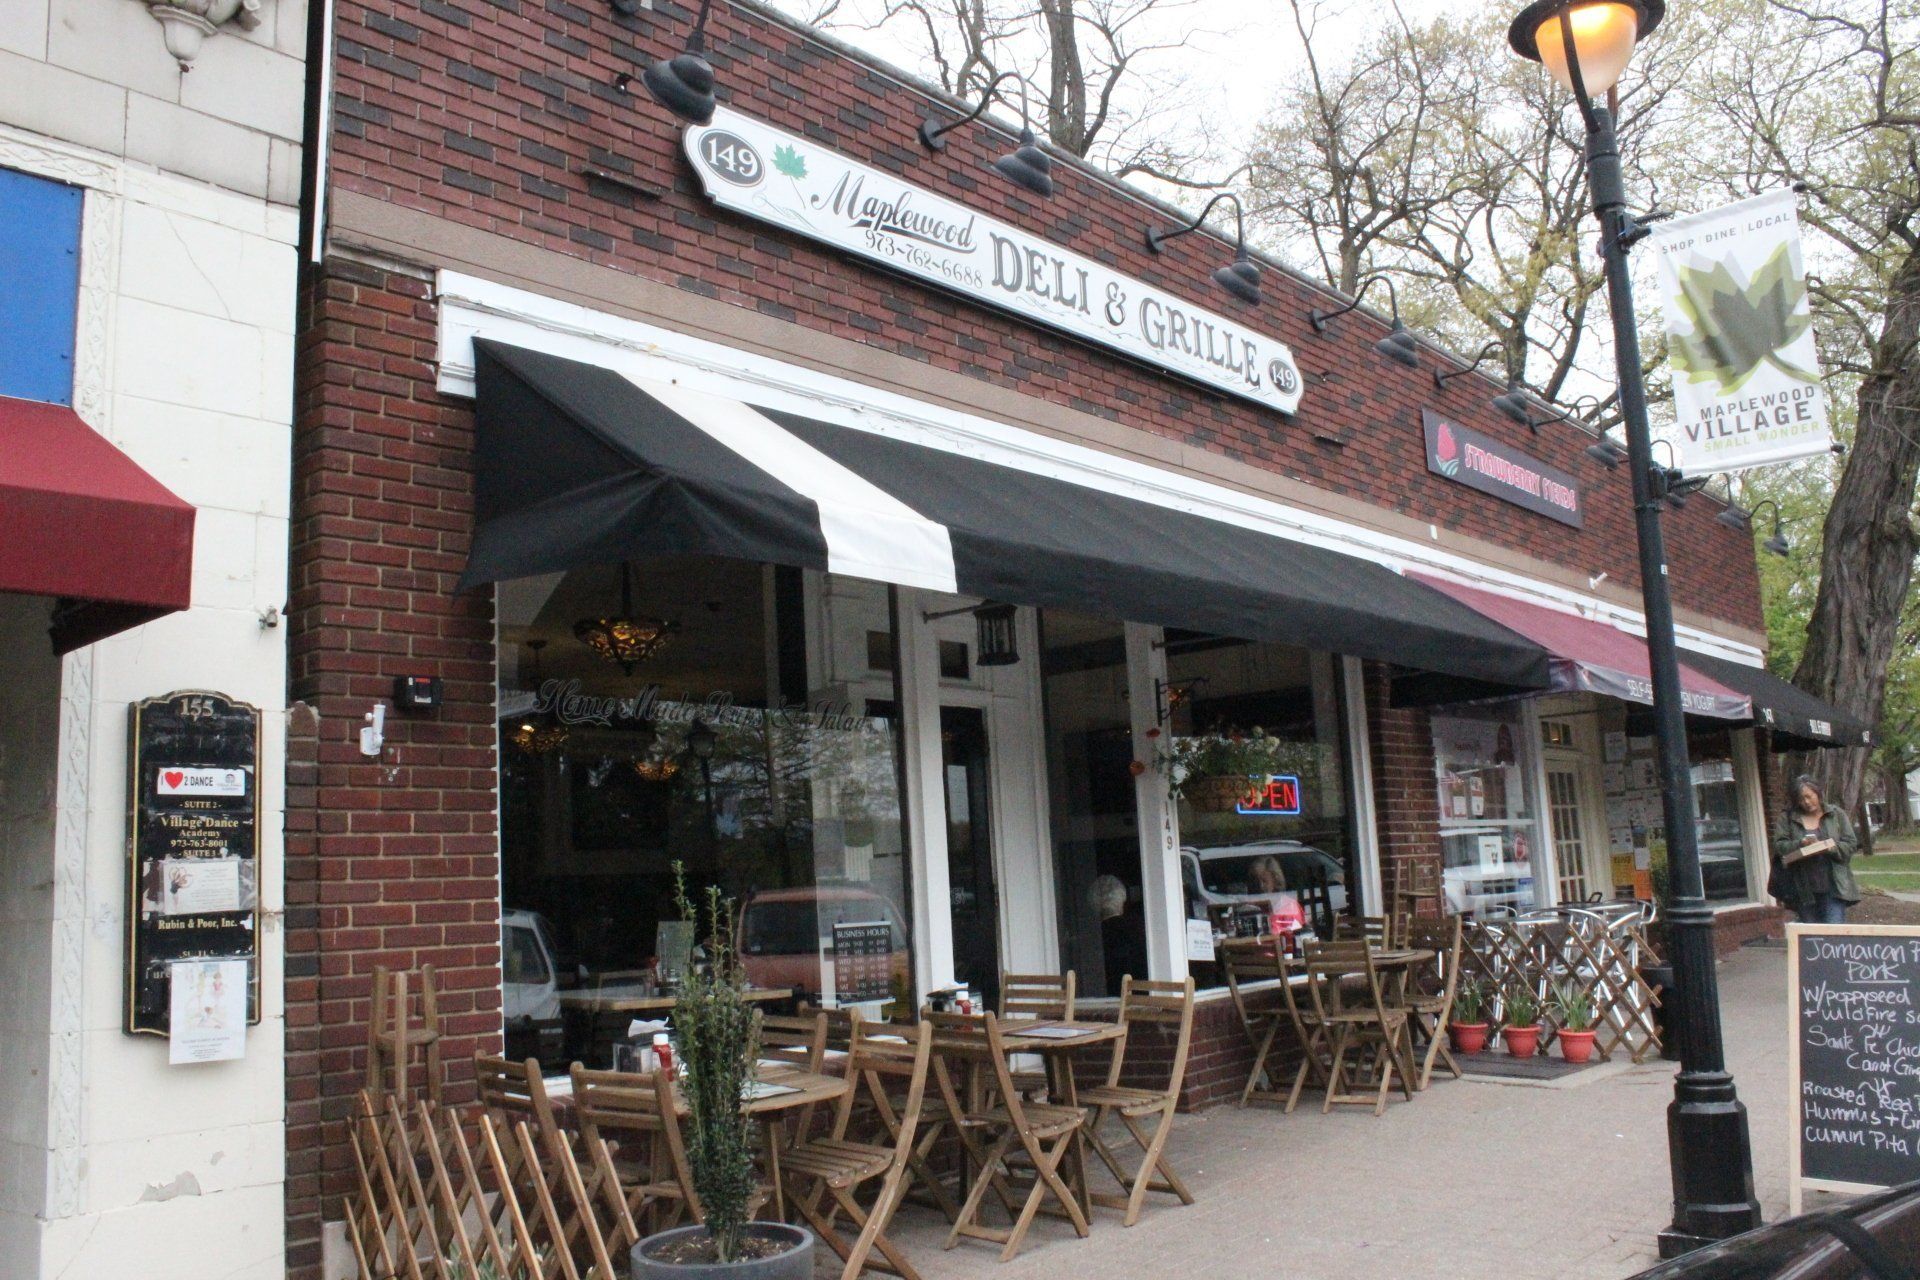 Photo of the Maplewood Deli and Grille restaurant